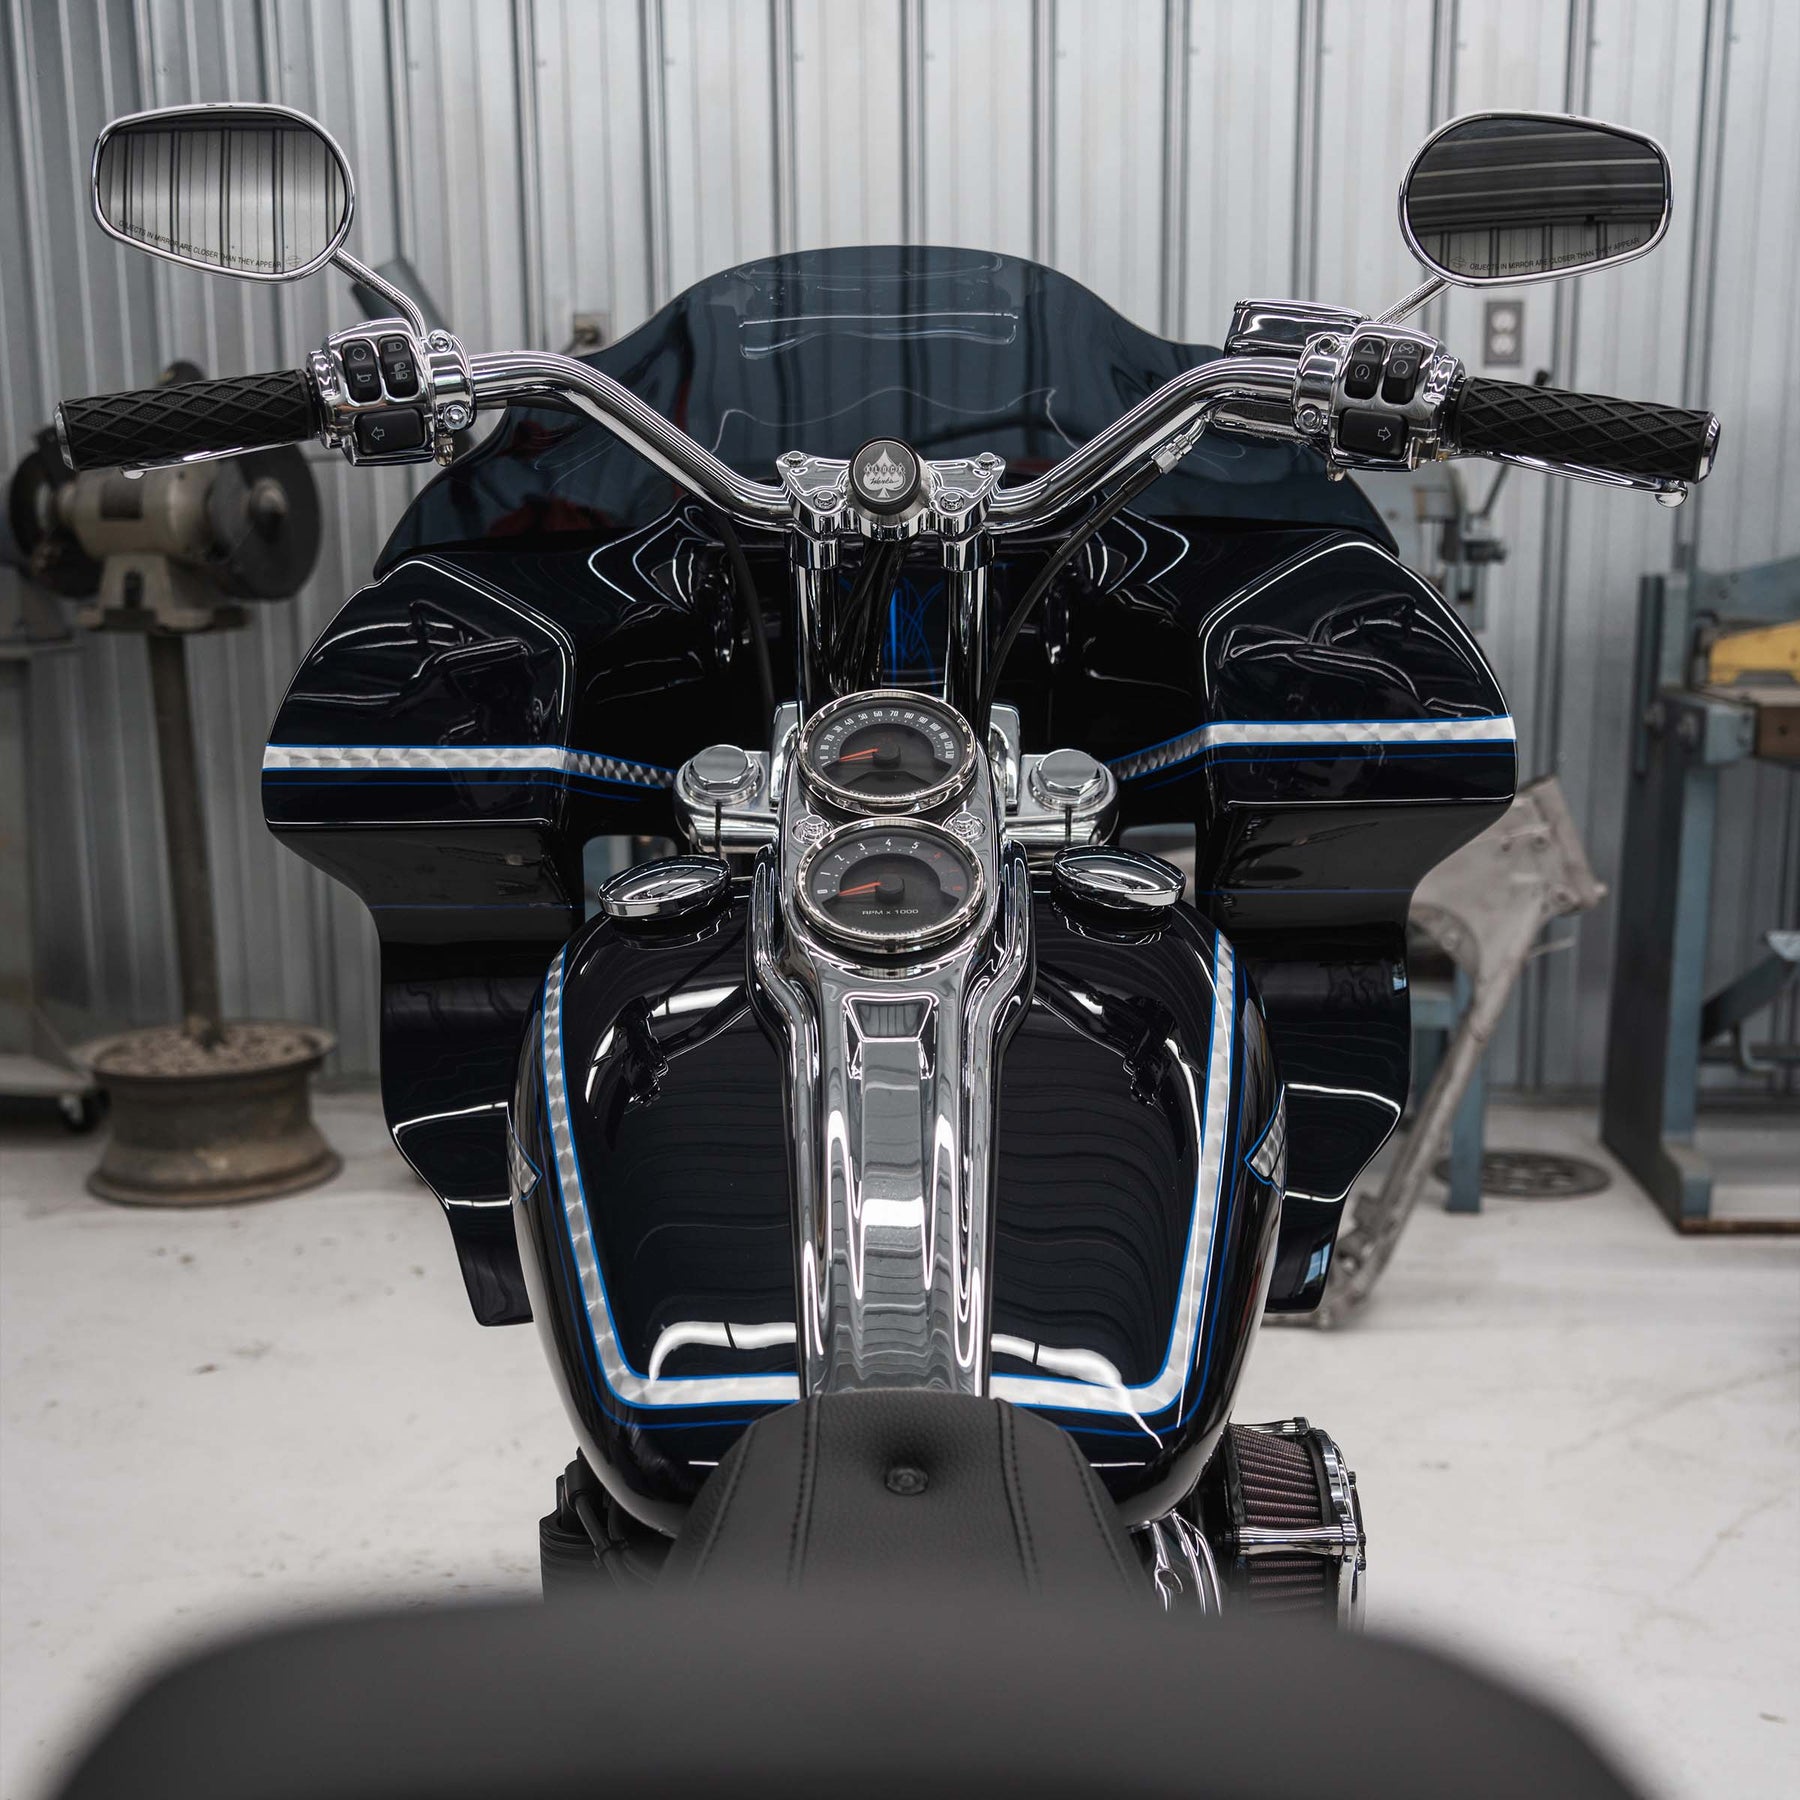 Harley-Davidson FXRP Fairing Fit Kit for Softail Motorcycles showing completed fairing on bike 